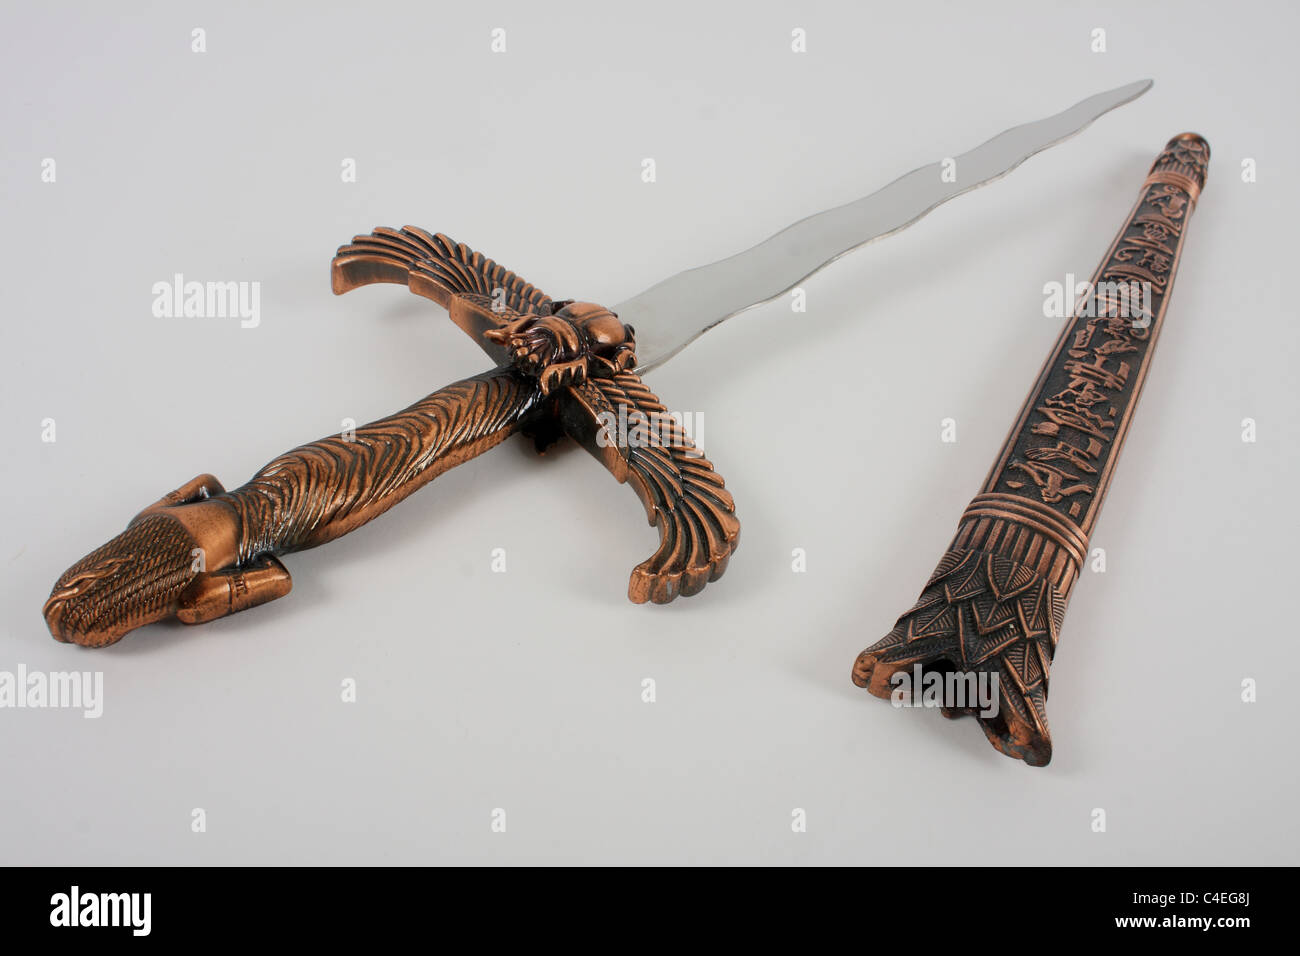 A ceremonial athame for ritual use and as a lethal weapon. A knife has a sharp blade usually made of stainless steel. Stock Photo